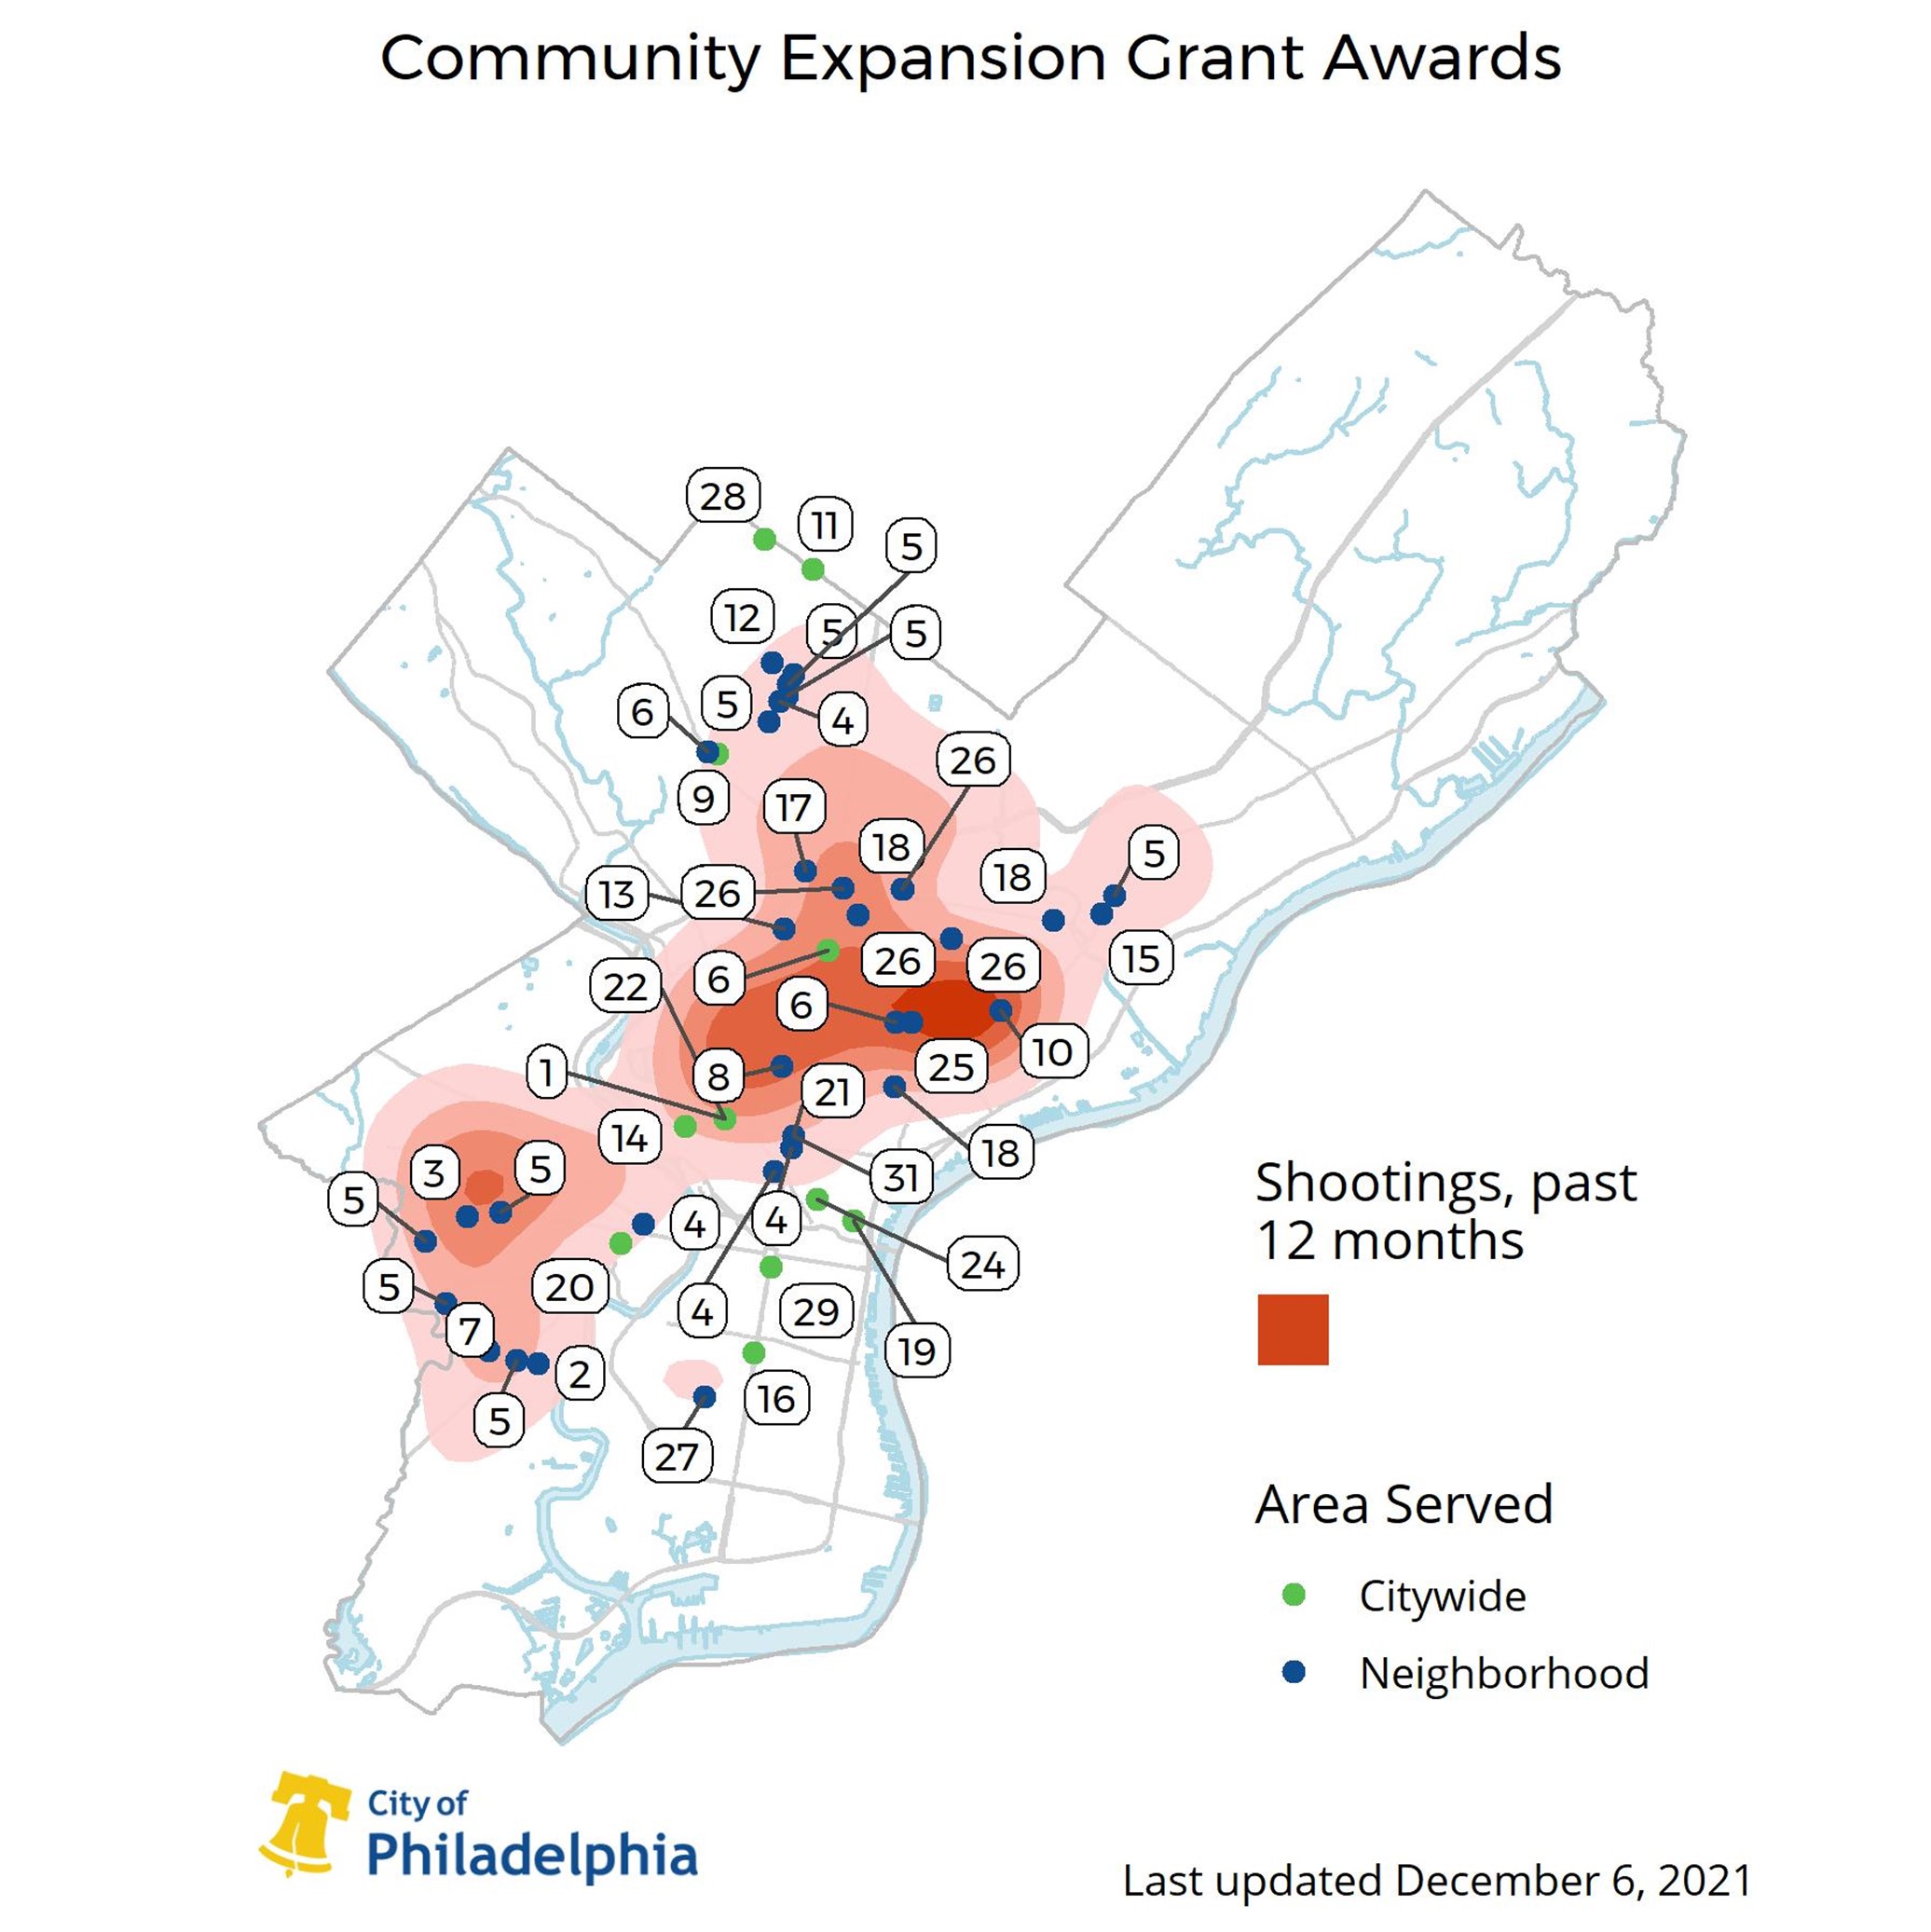 a map of philadelphia showing hotspots of shooting in the last 12 months in relation to the service areas of grant awardees